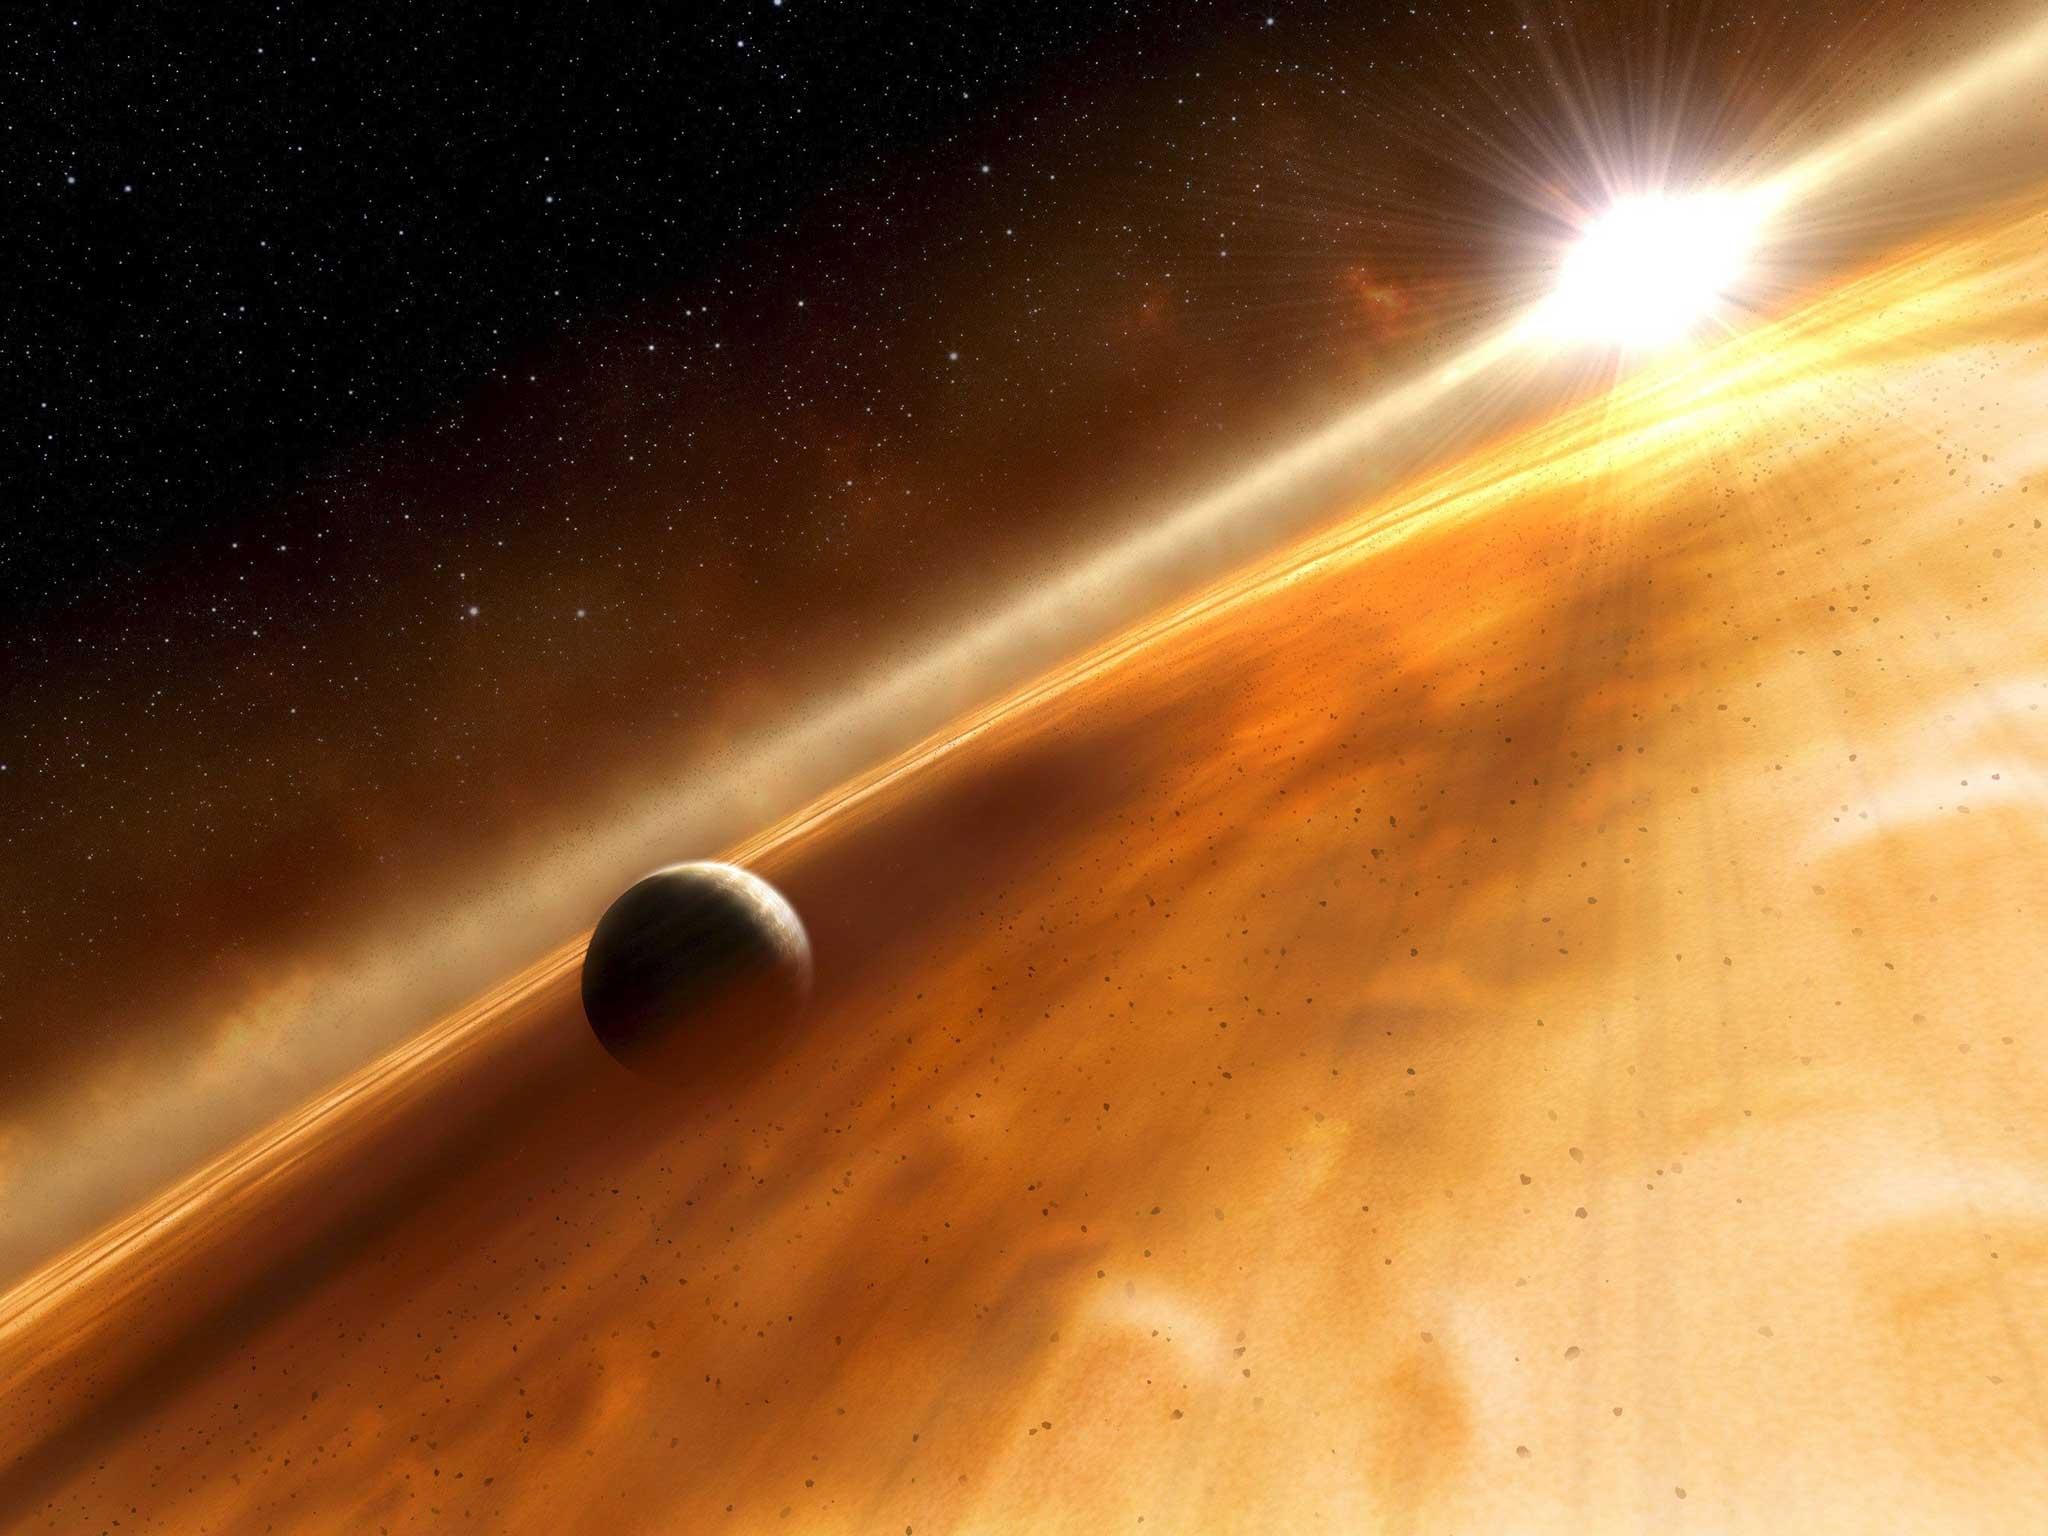 Artist's concept of the star Fomalhaut and the Jupiter-type planet that the Hubble Space Telescope observed.